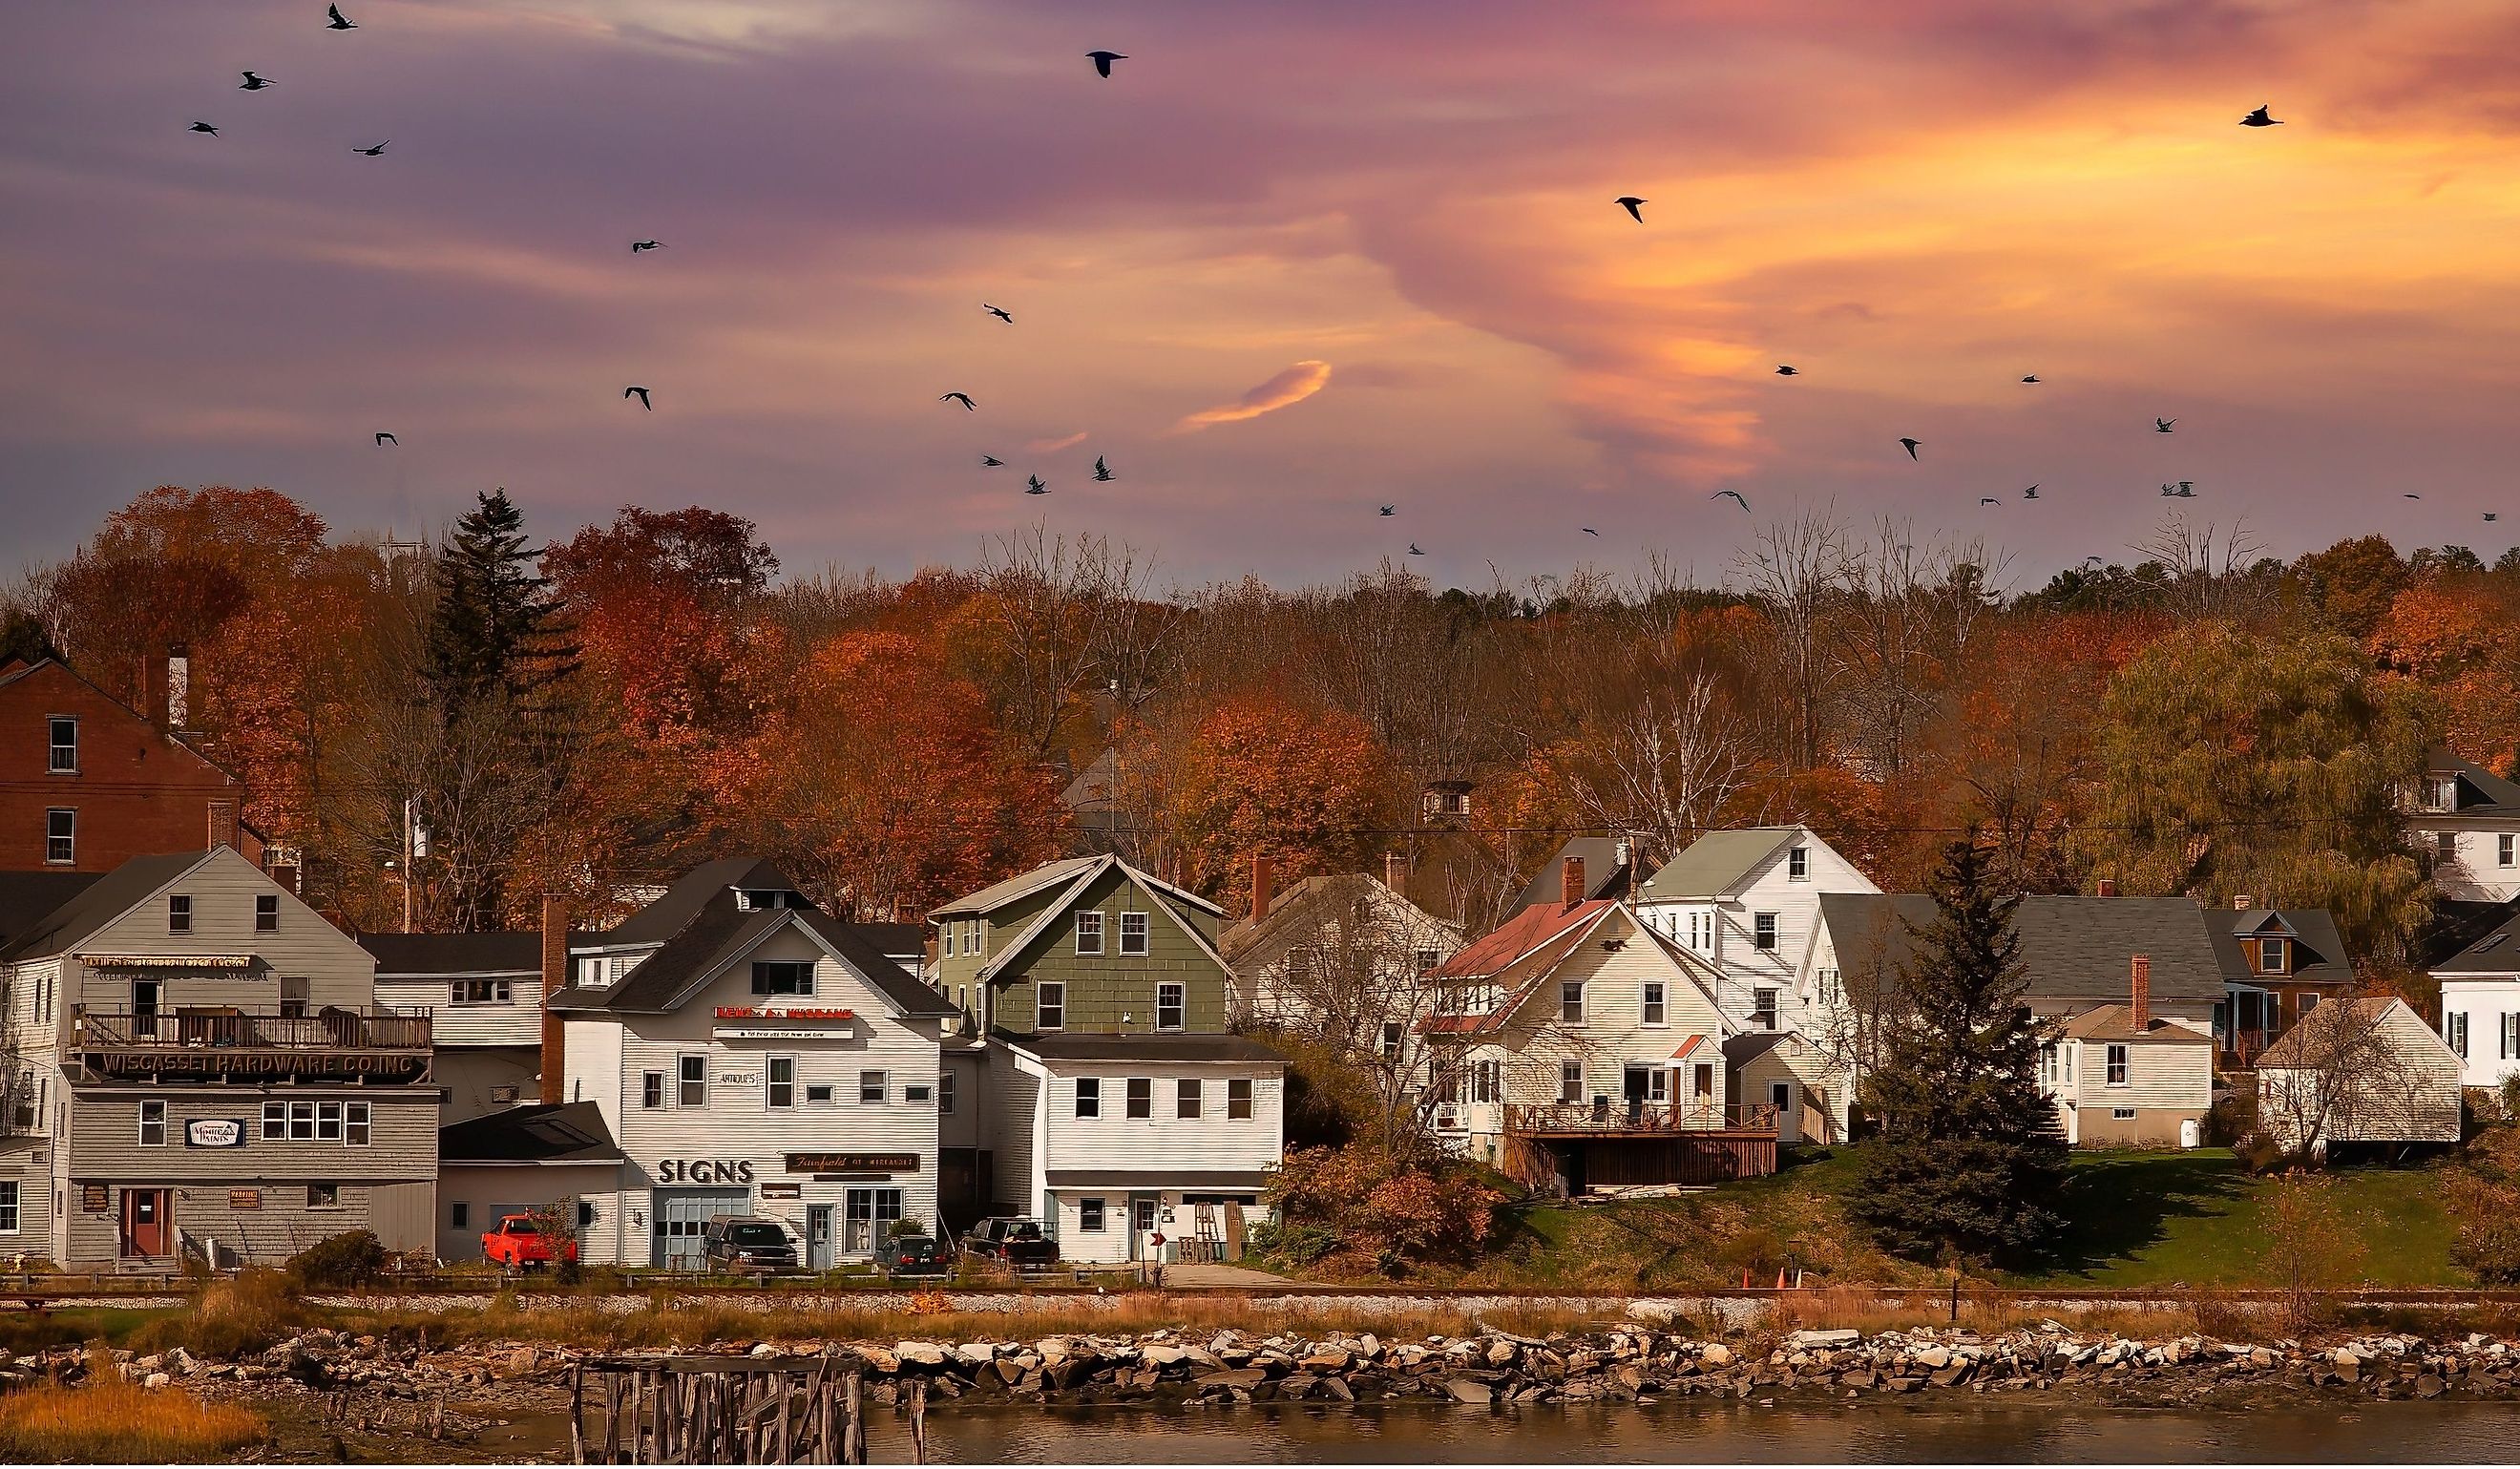 Waterfront homes and businesses in Wiscasset, Maine, at sunset. Editorial credit: Bob Pool / Shutterstock.com